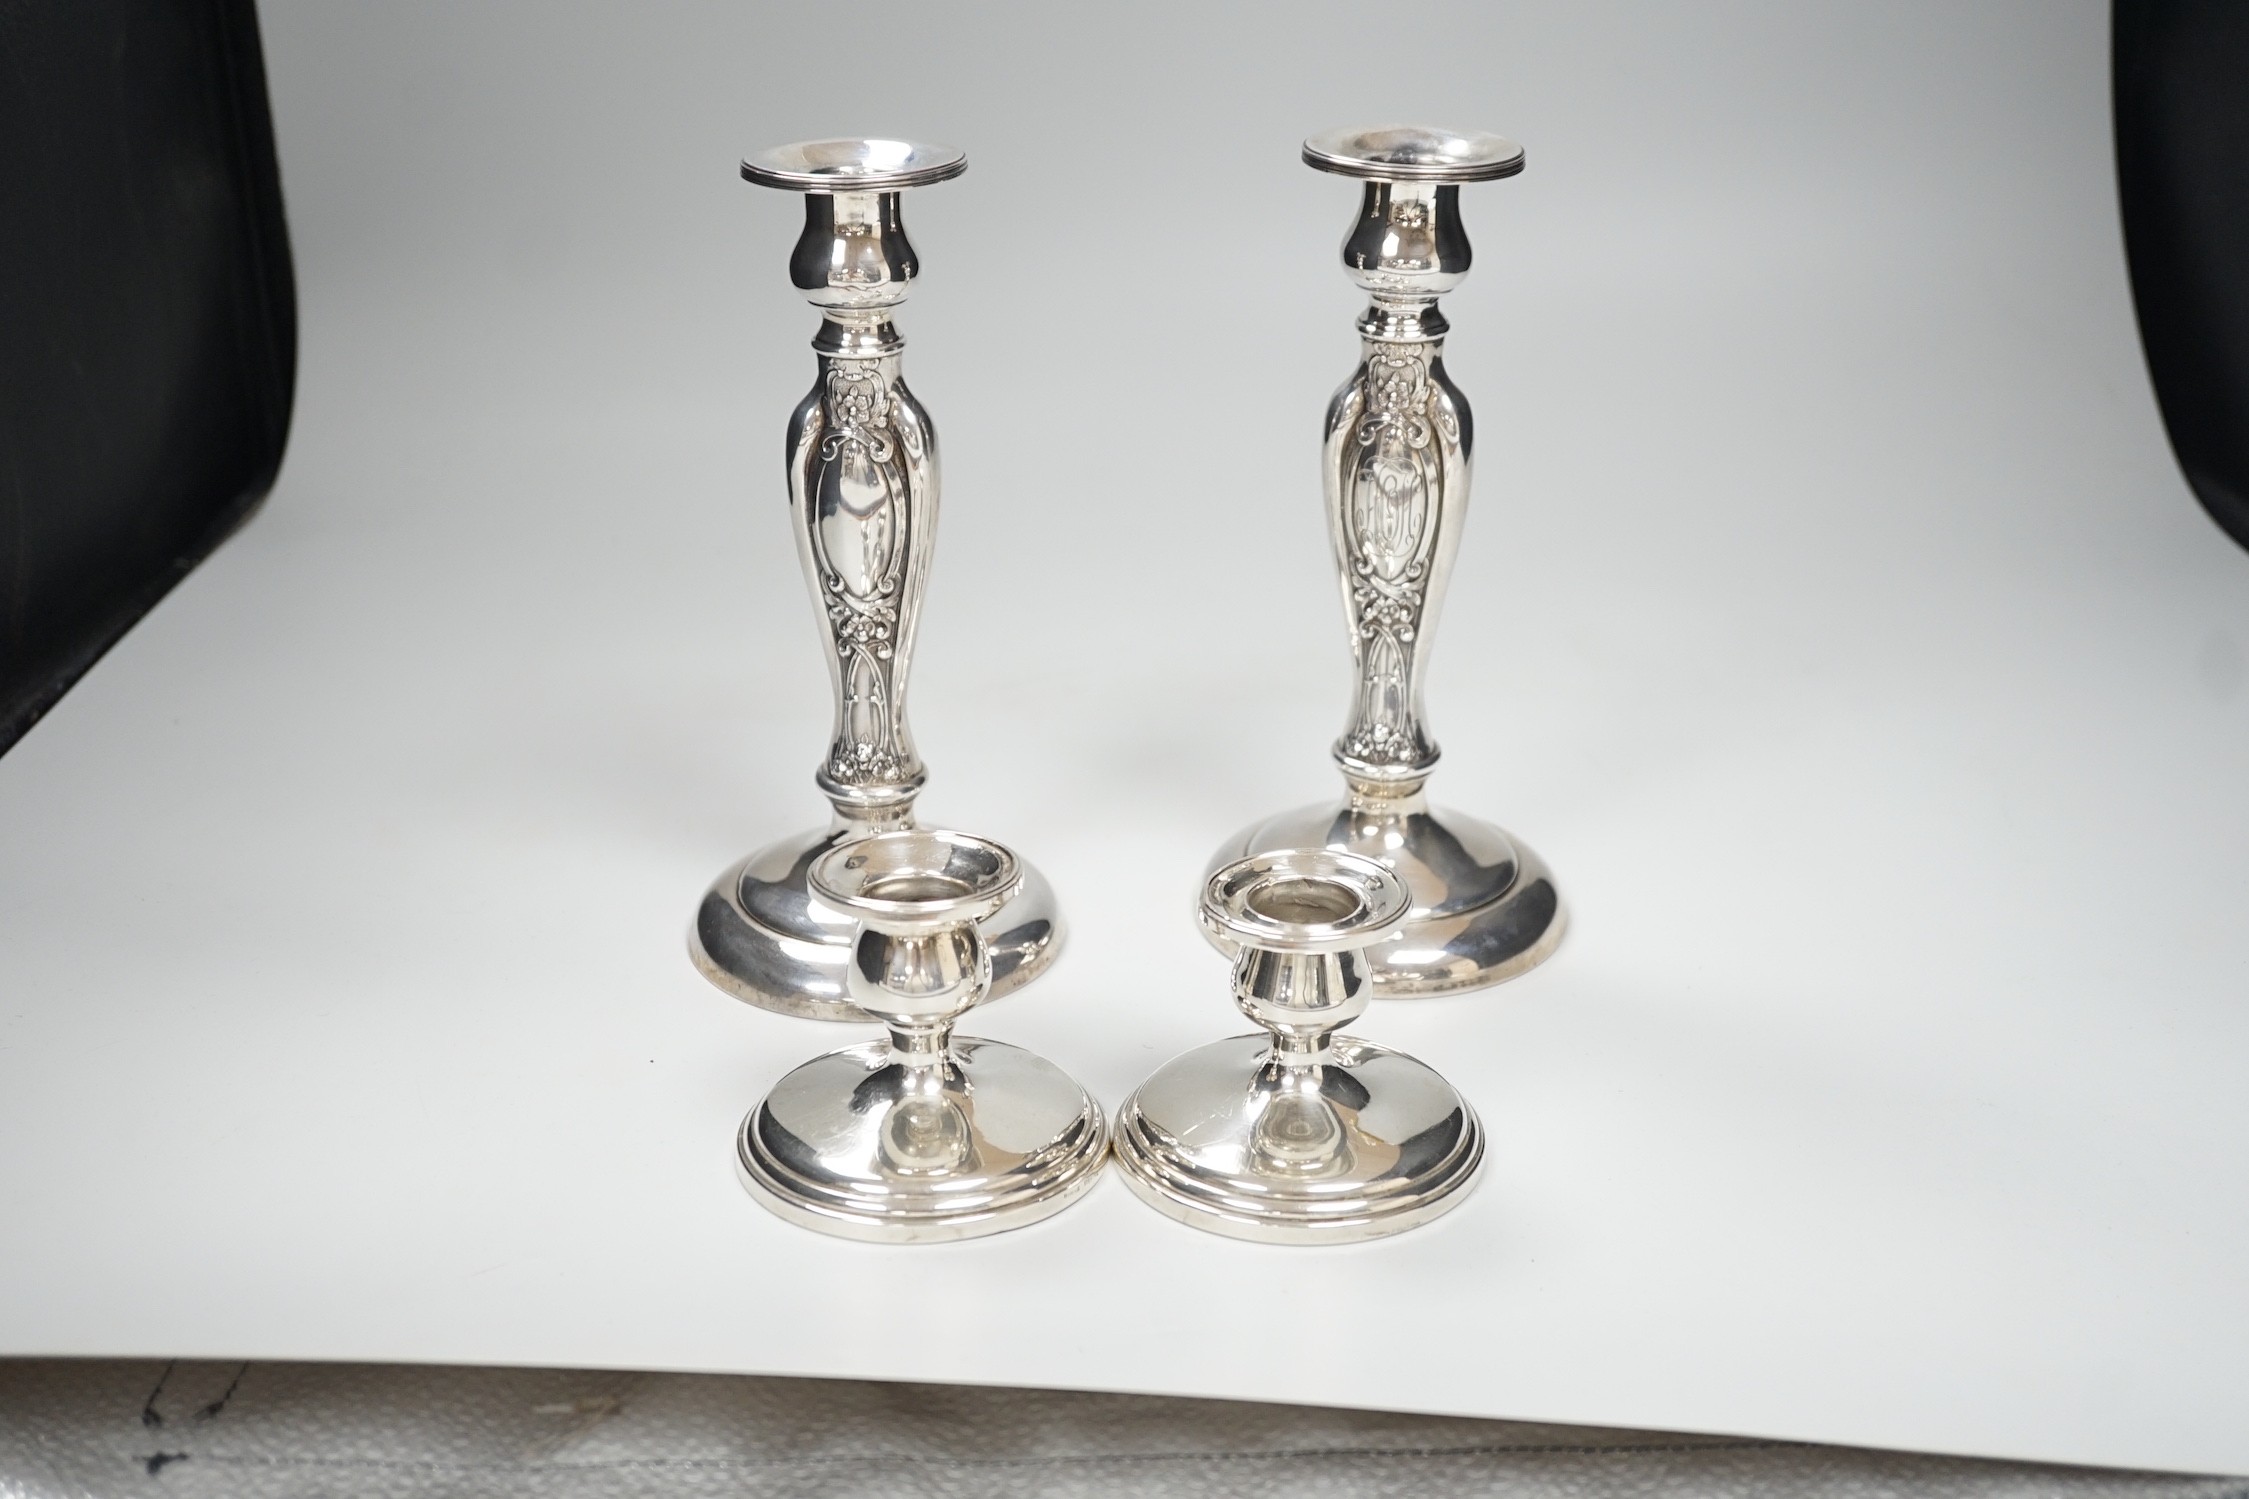 A pair of ornate sterling mounted candlesticks, 20.3cm, weighted and a pair of silver mounted dwarf candlesticks, 68mm, weighted.